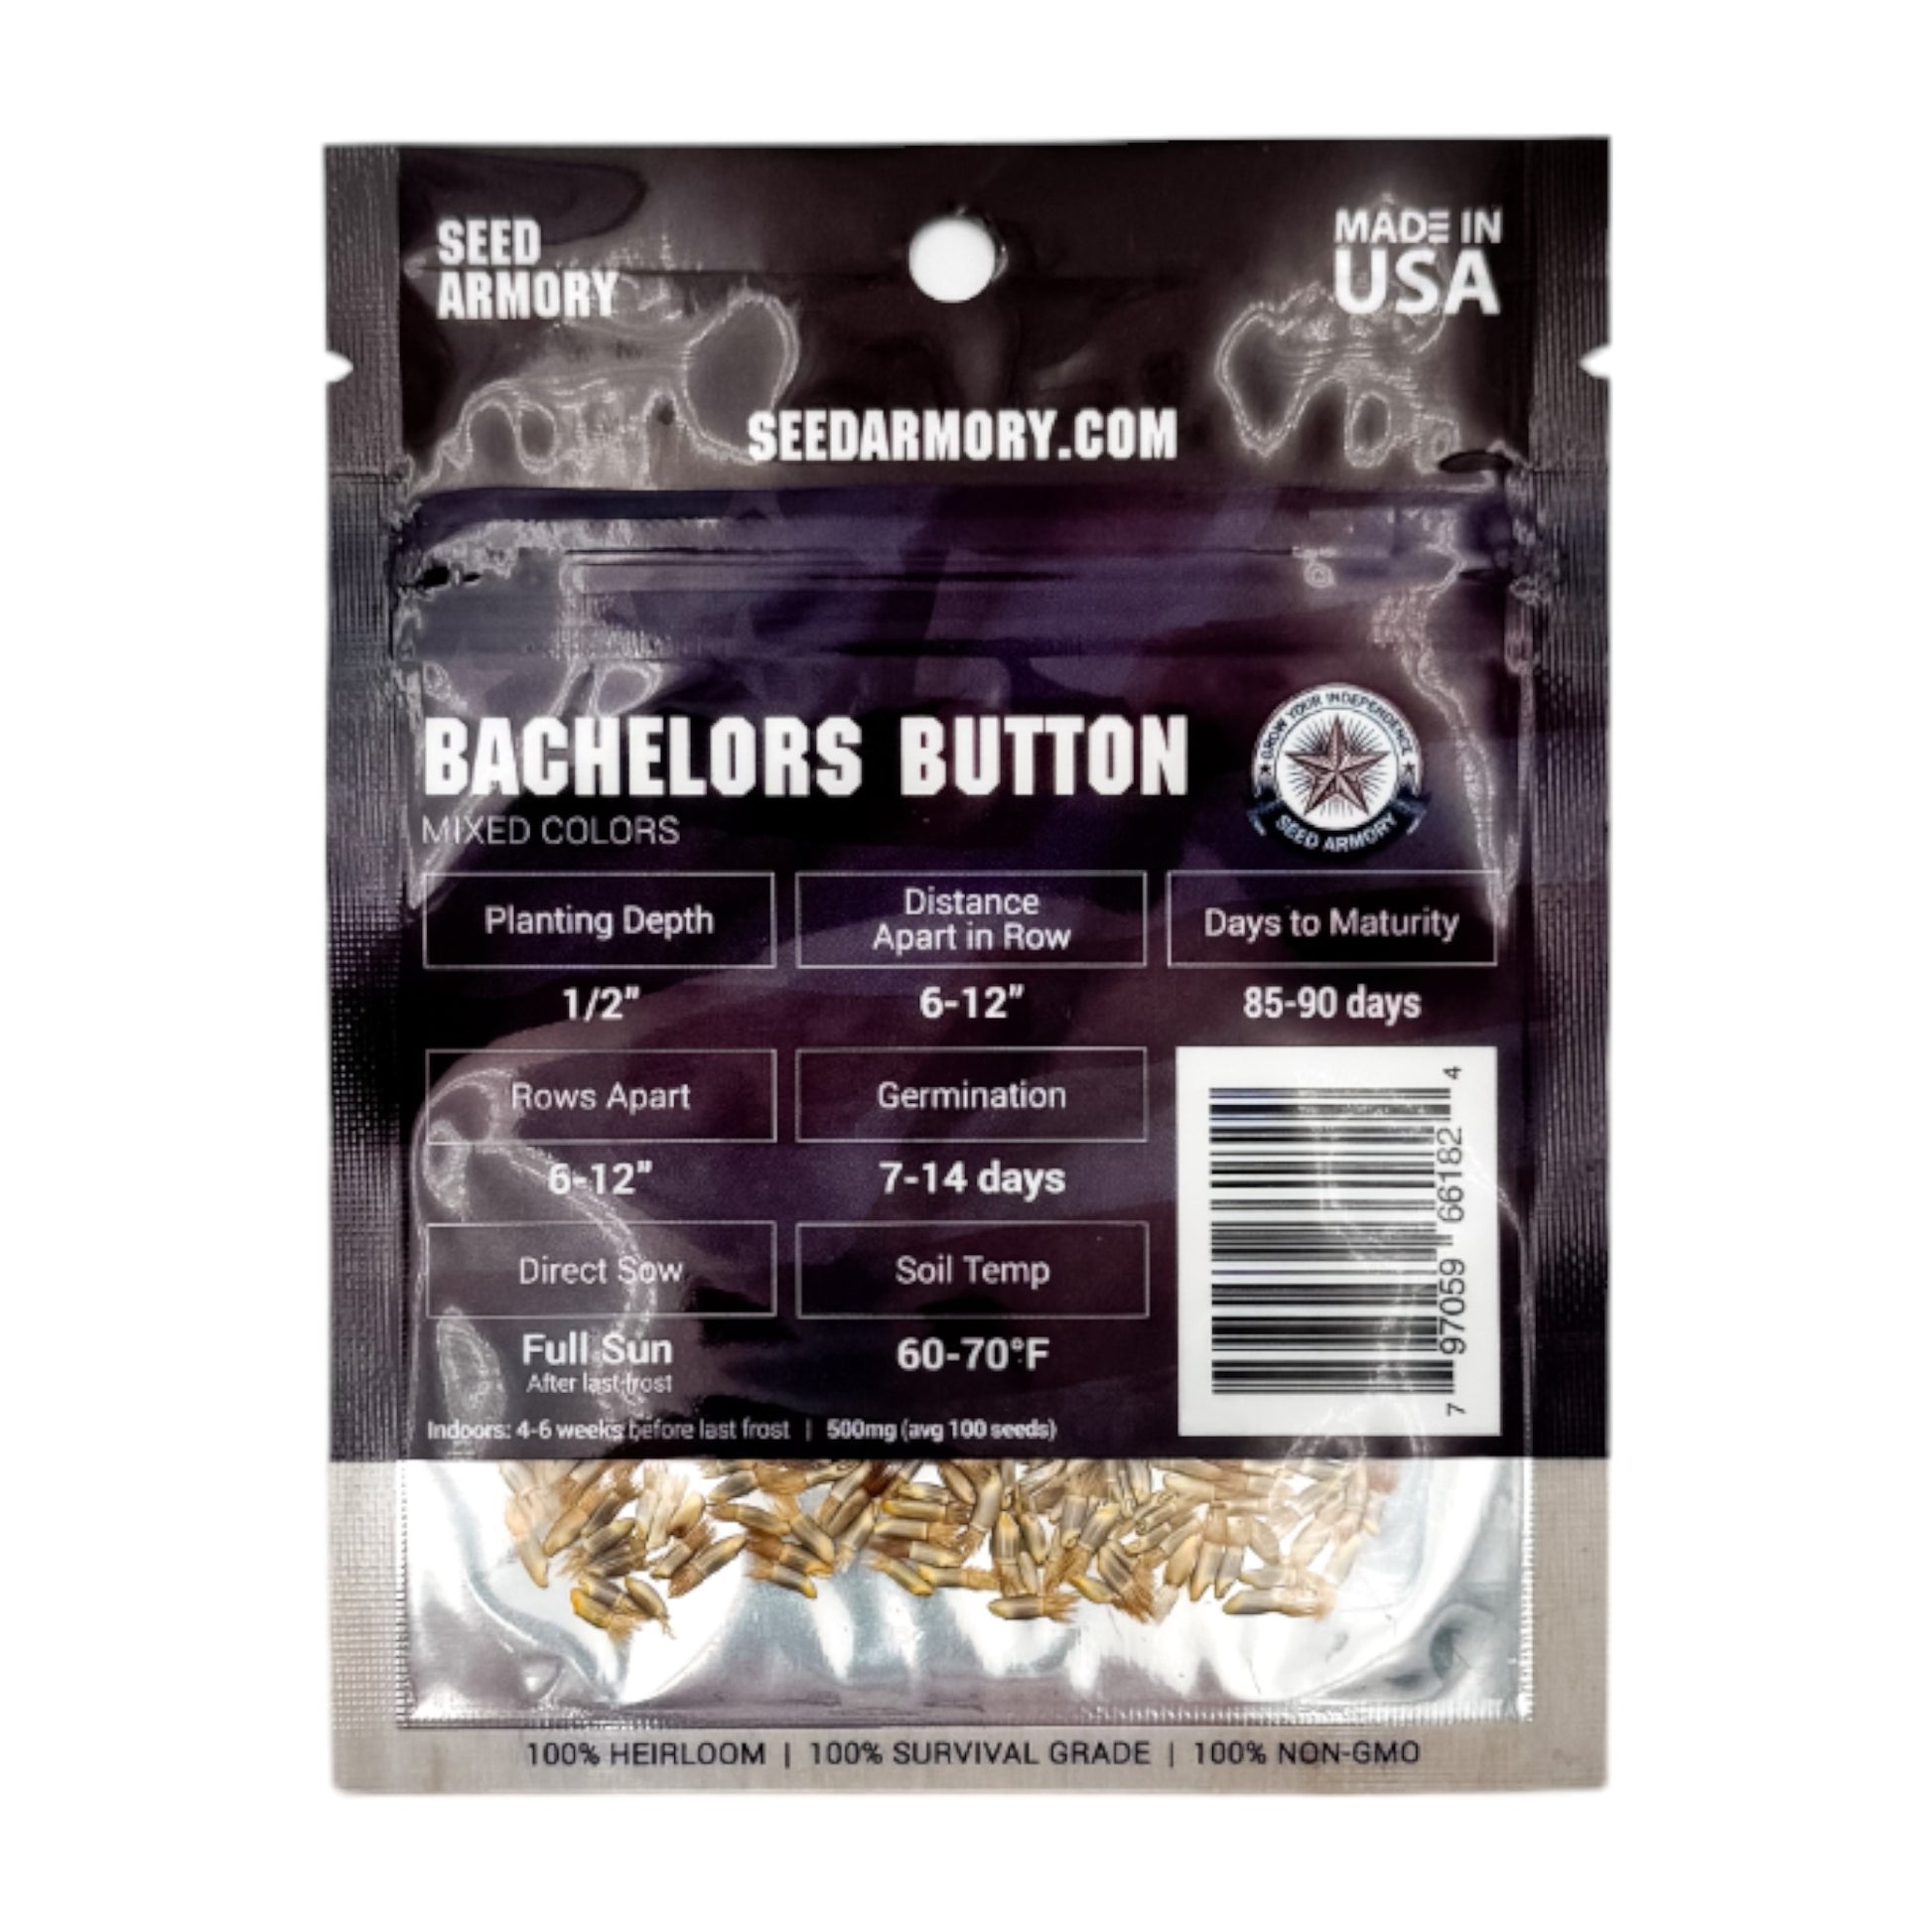 Bachelor's Button heirloom seeds packet with planting instructions